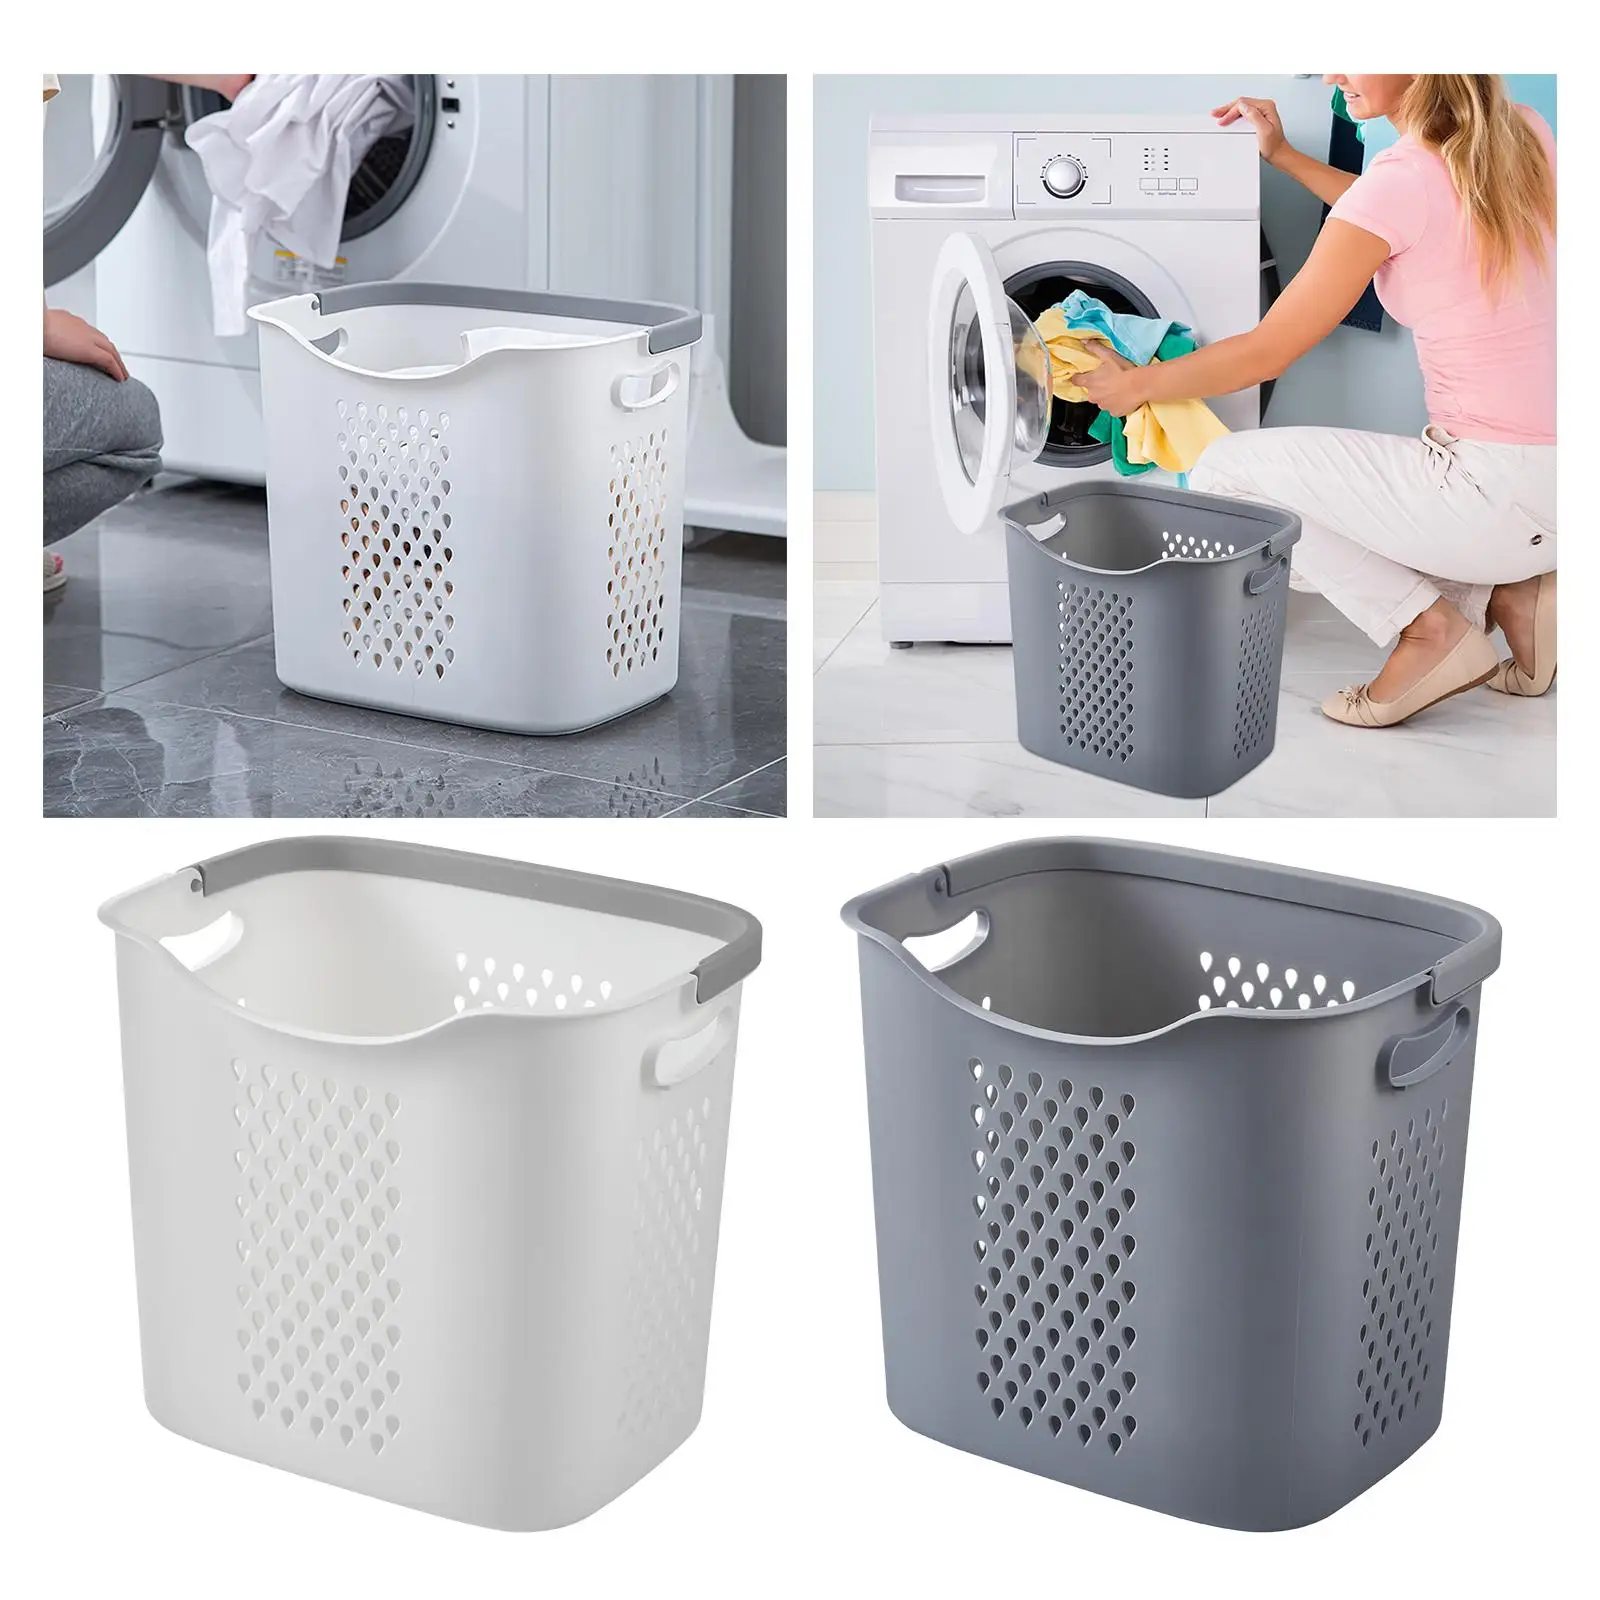 Laundry Basket Clothes Bag Bucket Organizer Storage Bucket for Dirty Clothes